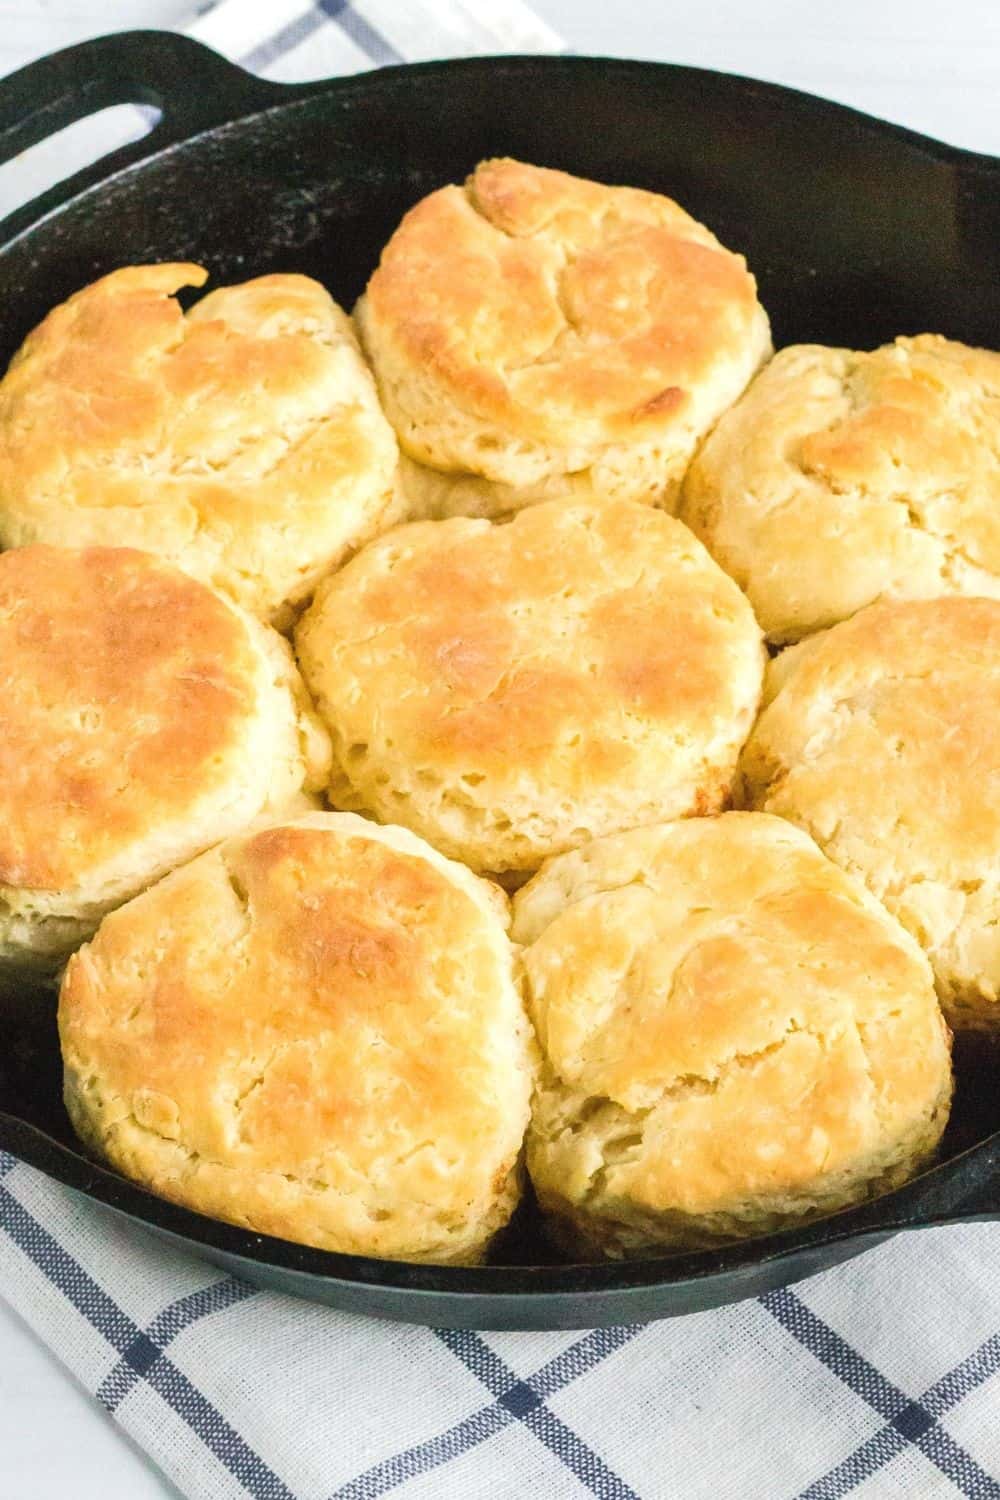 close-up view of golden-brown southern biscuits made with sour cream, freshly baked in a cast iron skillet